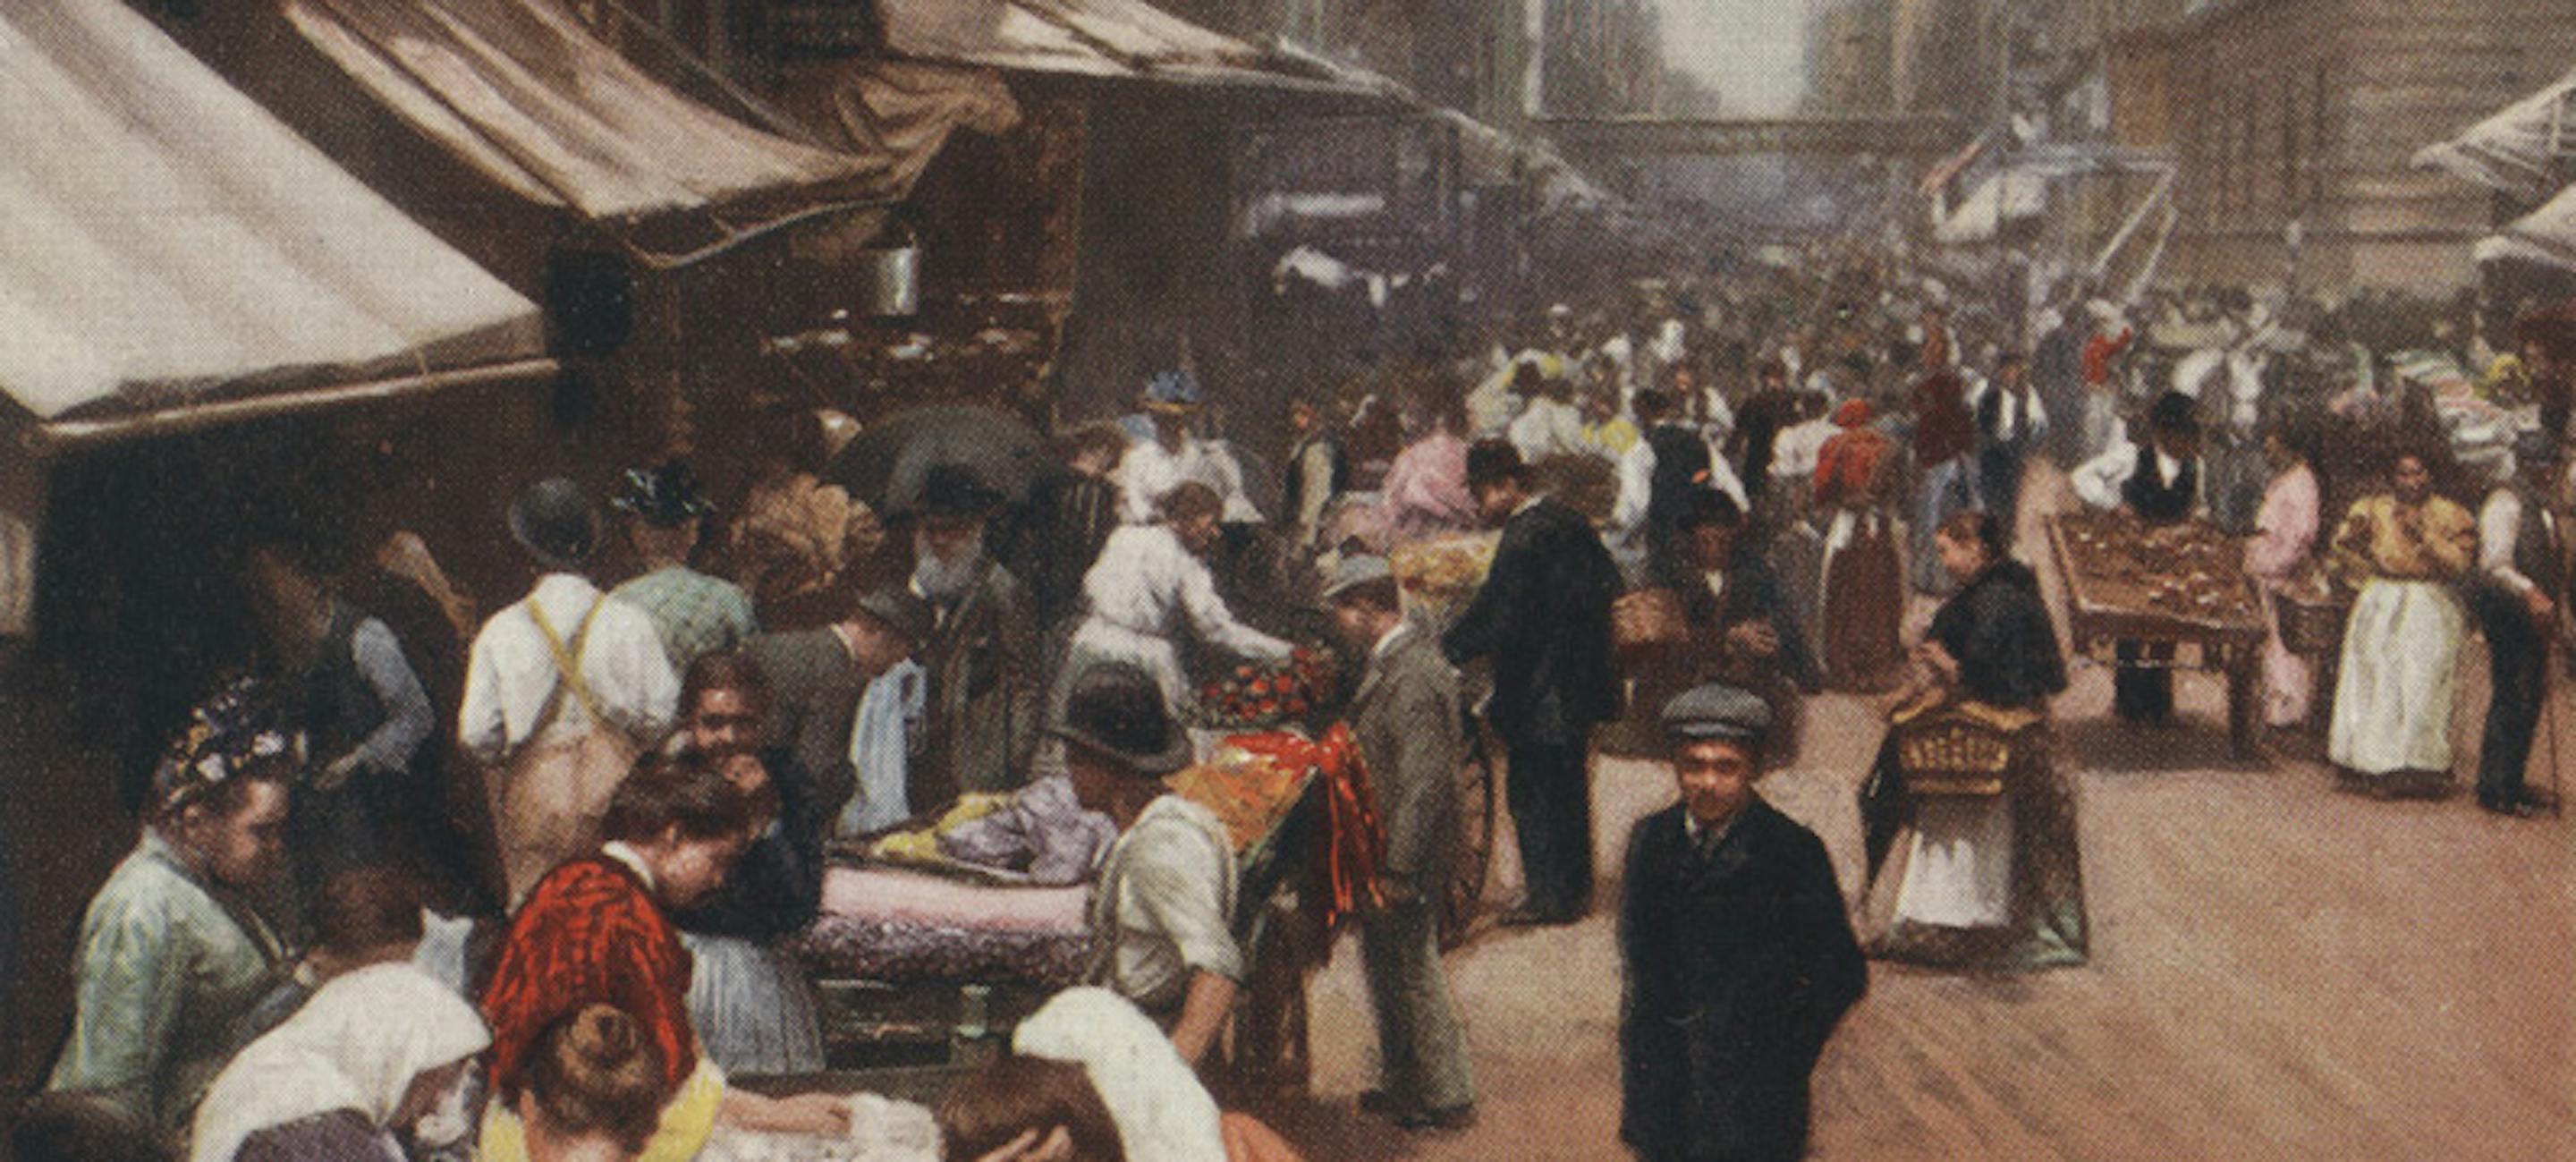 Image from a 1900 postcard showing a bustling scene on Hester Street with a lot of street vendors